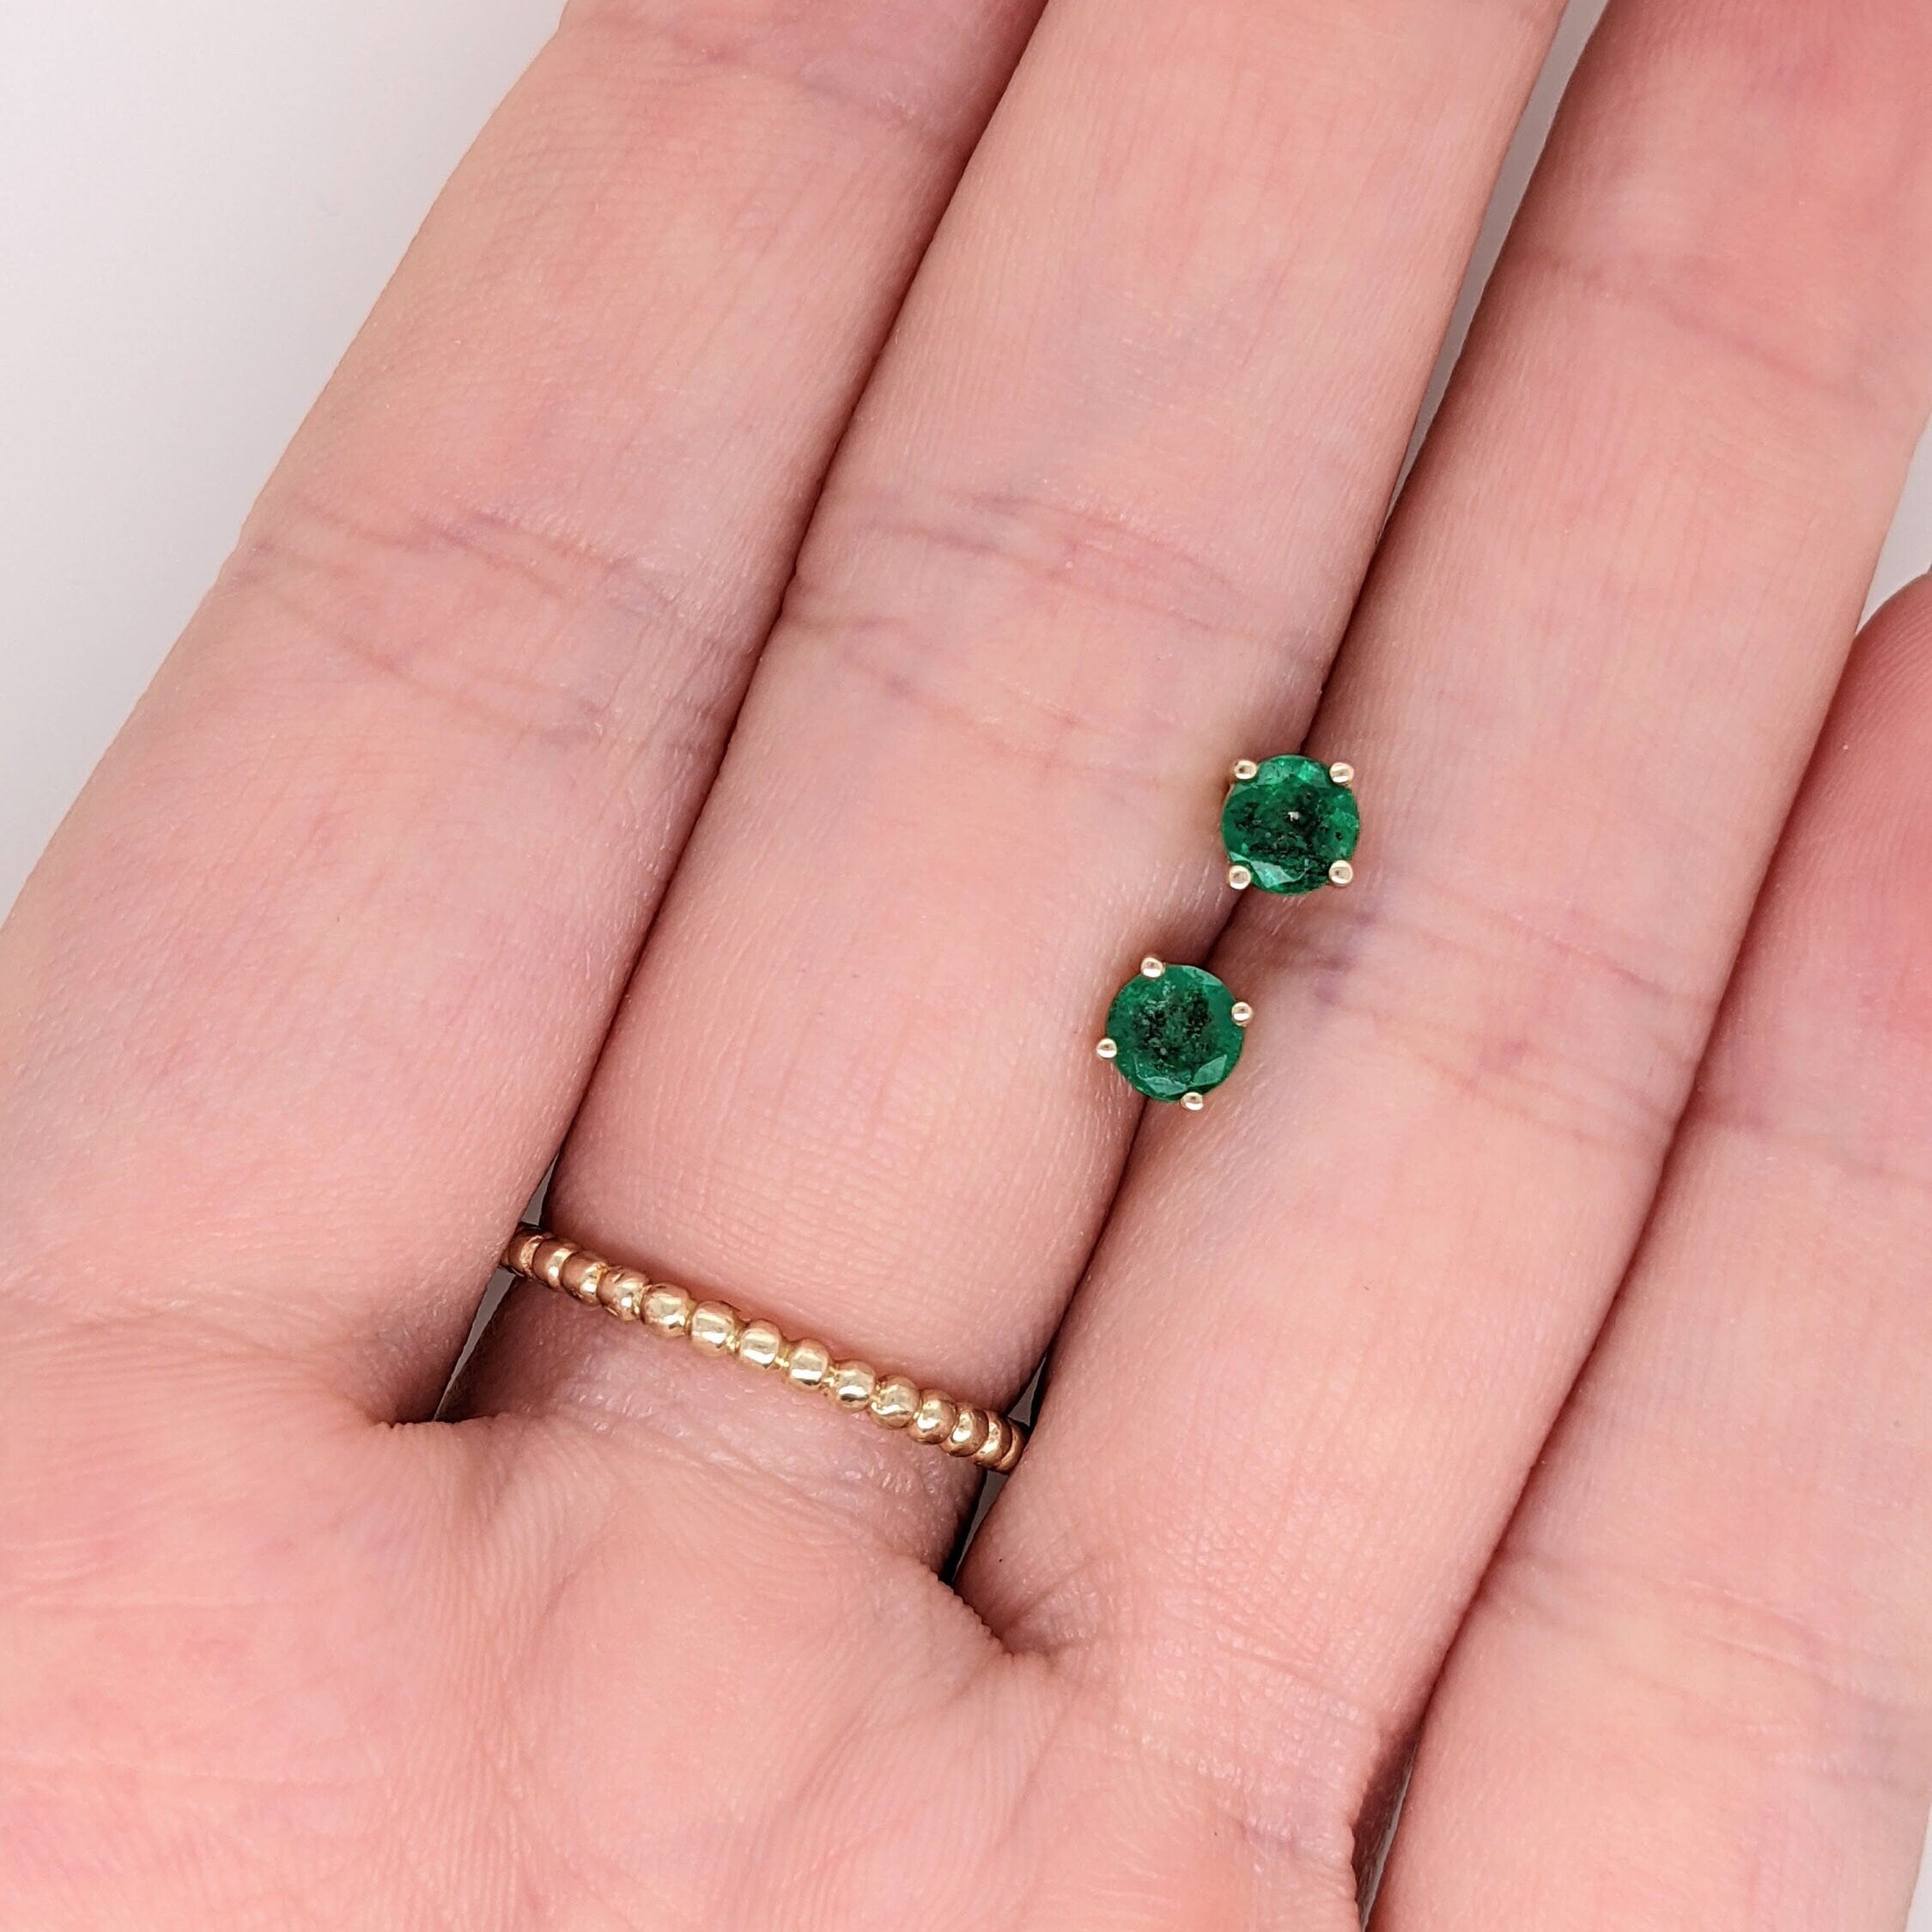 Zambian Emerald Studs in Solid 14k Yellow, White or Rose Gold | Round 4mm | May Birthstone | Pushback Earrings | Four Prong | Natural Gems